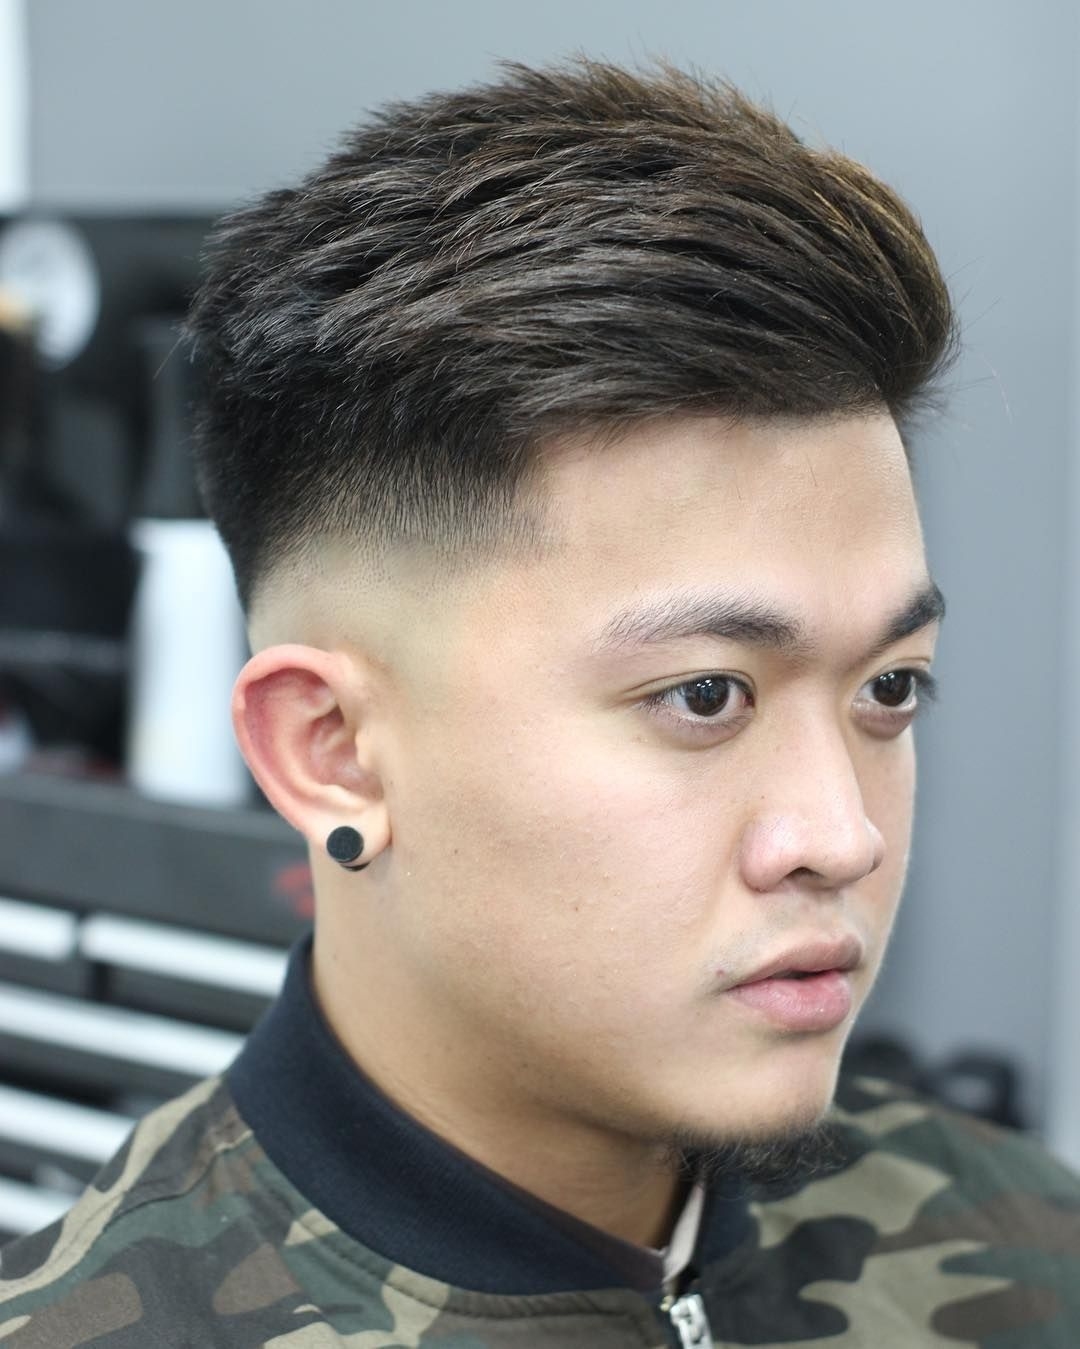 25 + Best Low Fade Haircuts &amp;amp; Hairstyles For Men&amp;#039;s | Boys Haircuts intended for Superb How To Do Asian Hairstyles For Guys